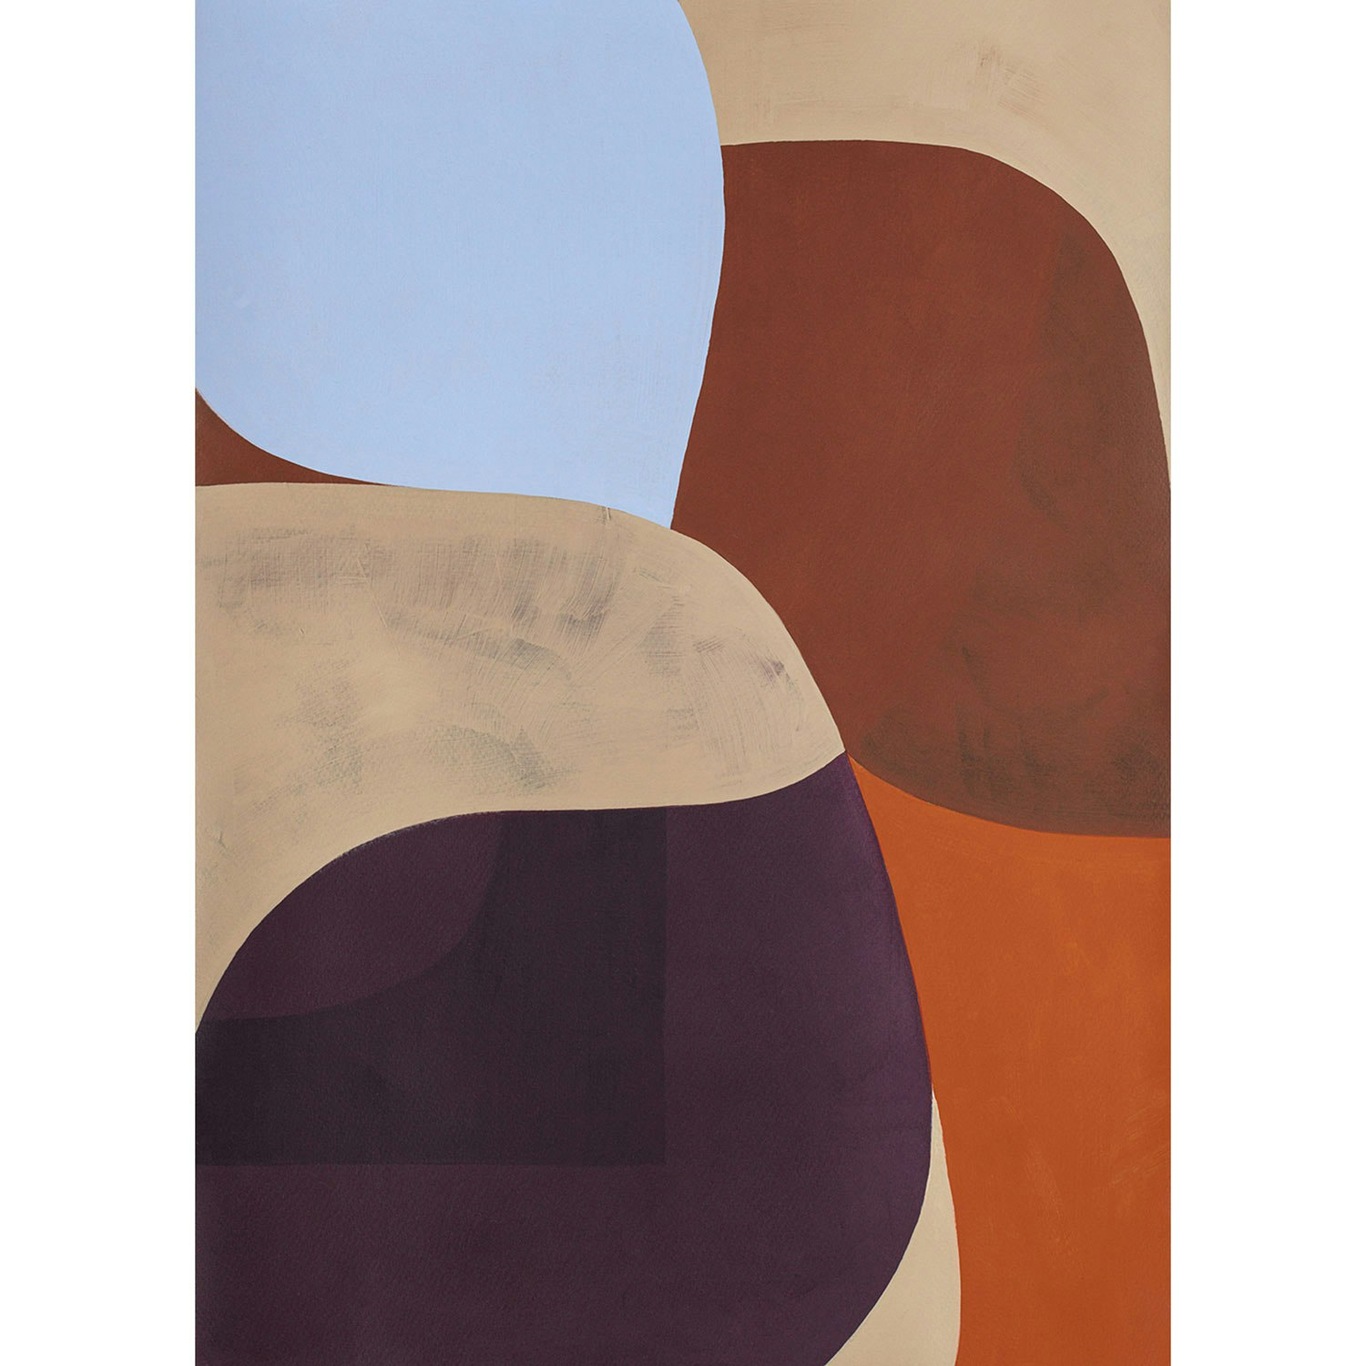 Painted Shapes 02 Poster 70x100 cm